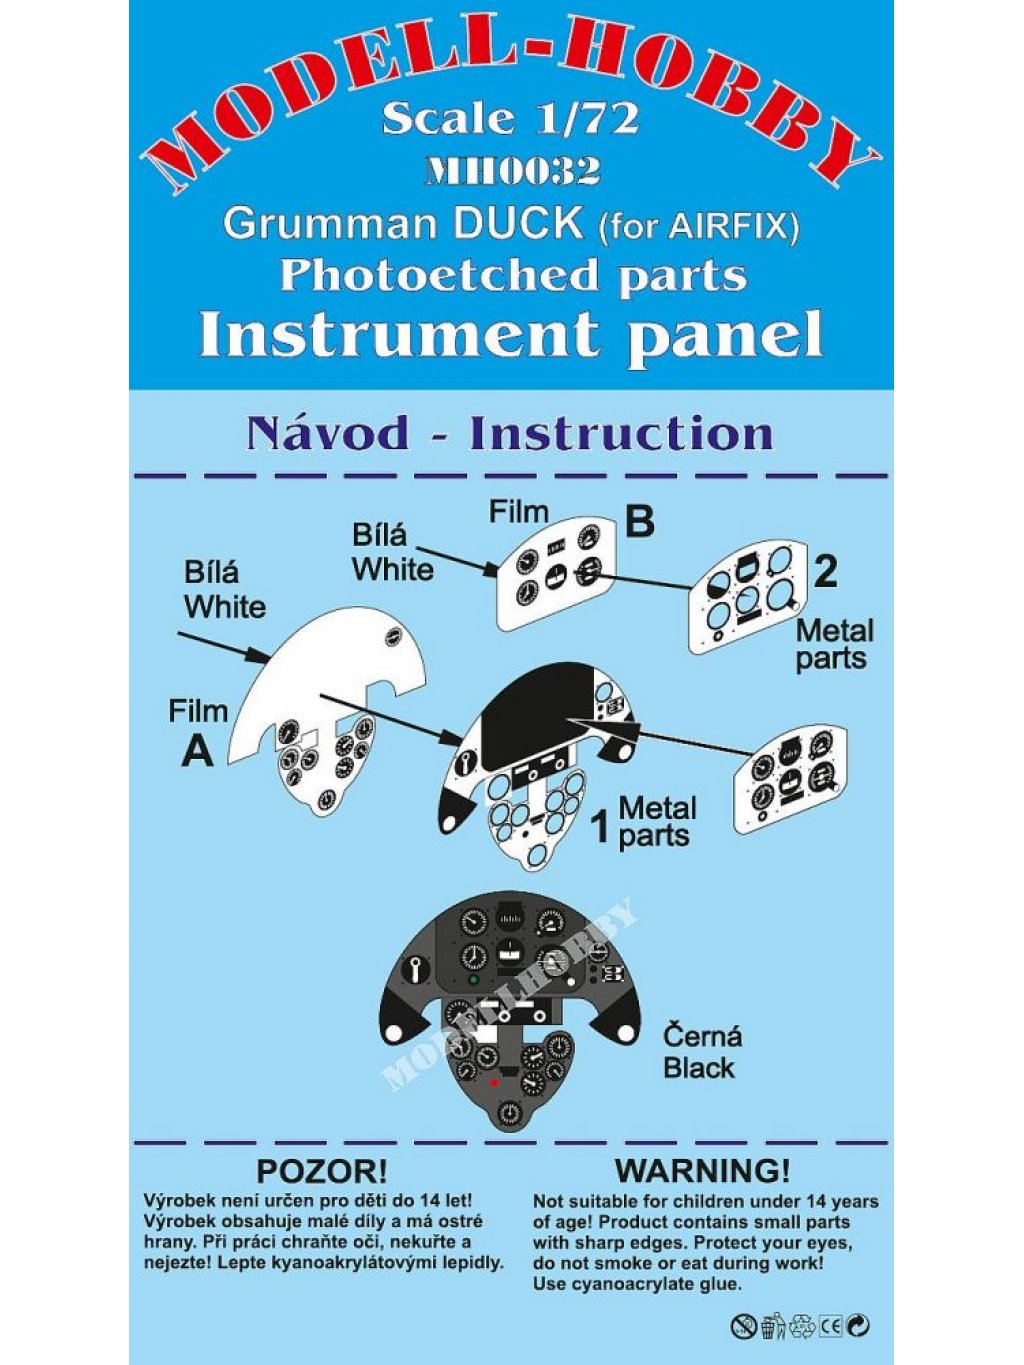 Grumman J2F Duck Photoetched parts instrument panel for Airfix ex Modell-Hobby